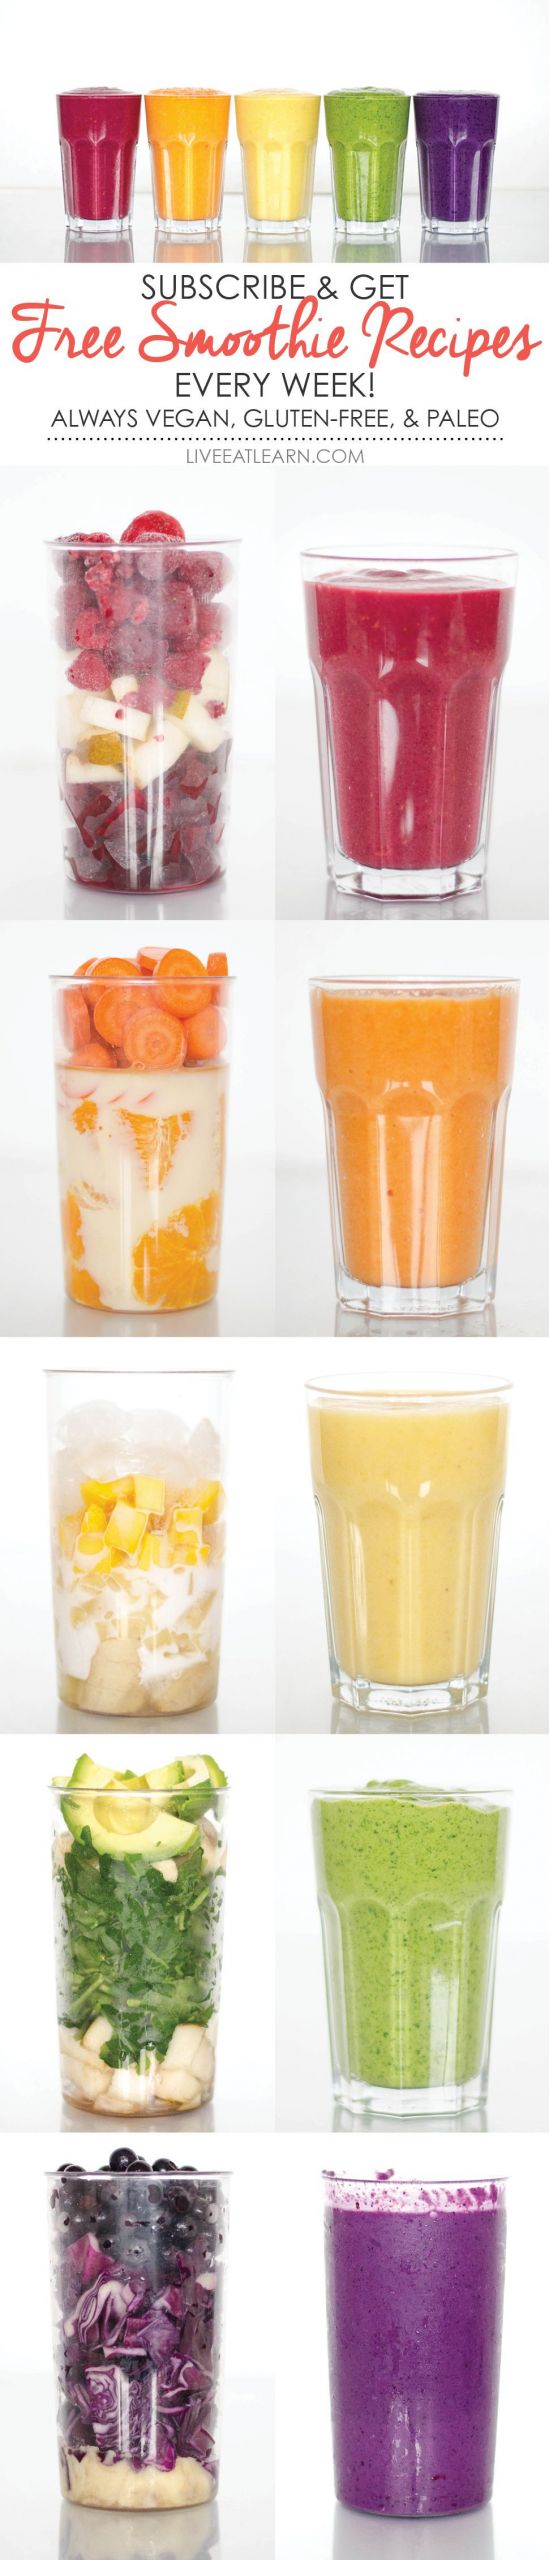 Best Fast Food Smoothies
 Healthy smoothie recipes to give you the boost of energy